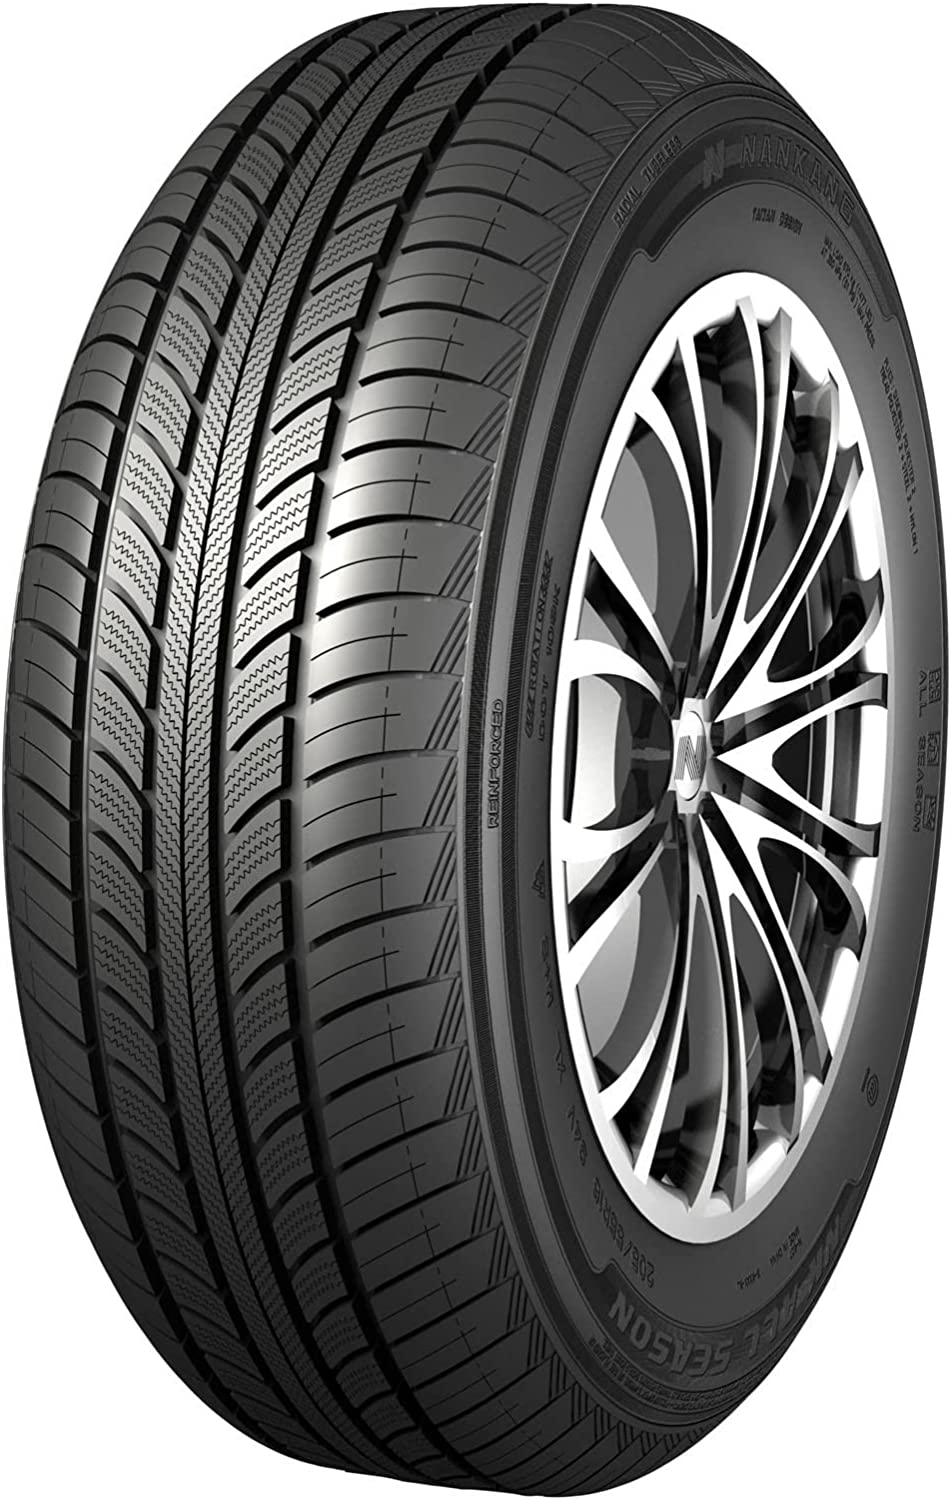 Gomme Nuove Nankang 175/70 R13 82T N-607+ M+S pneumatici nuovi All Season